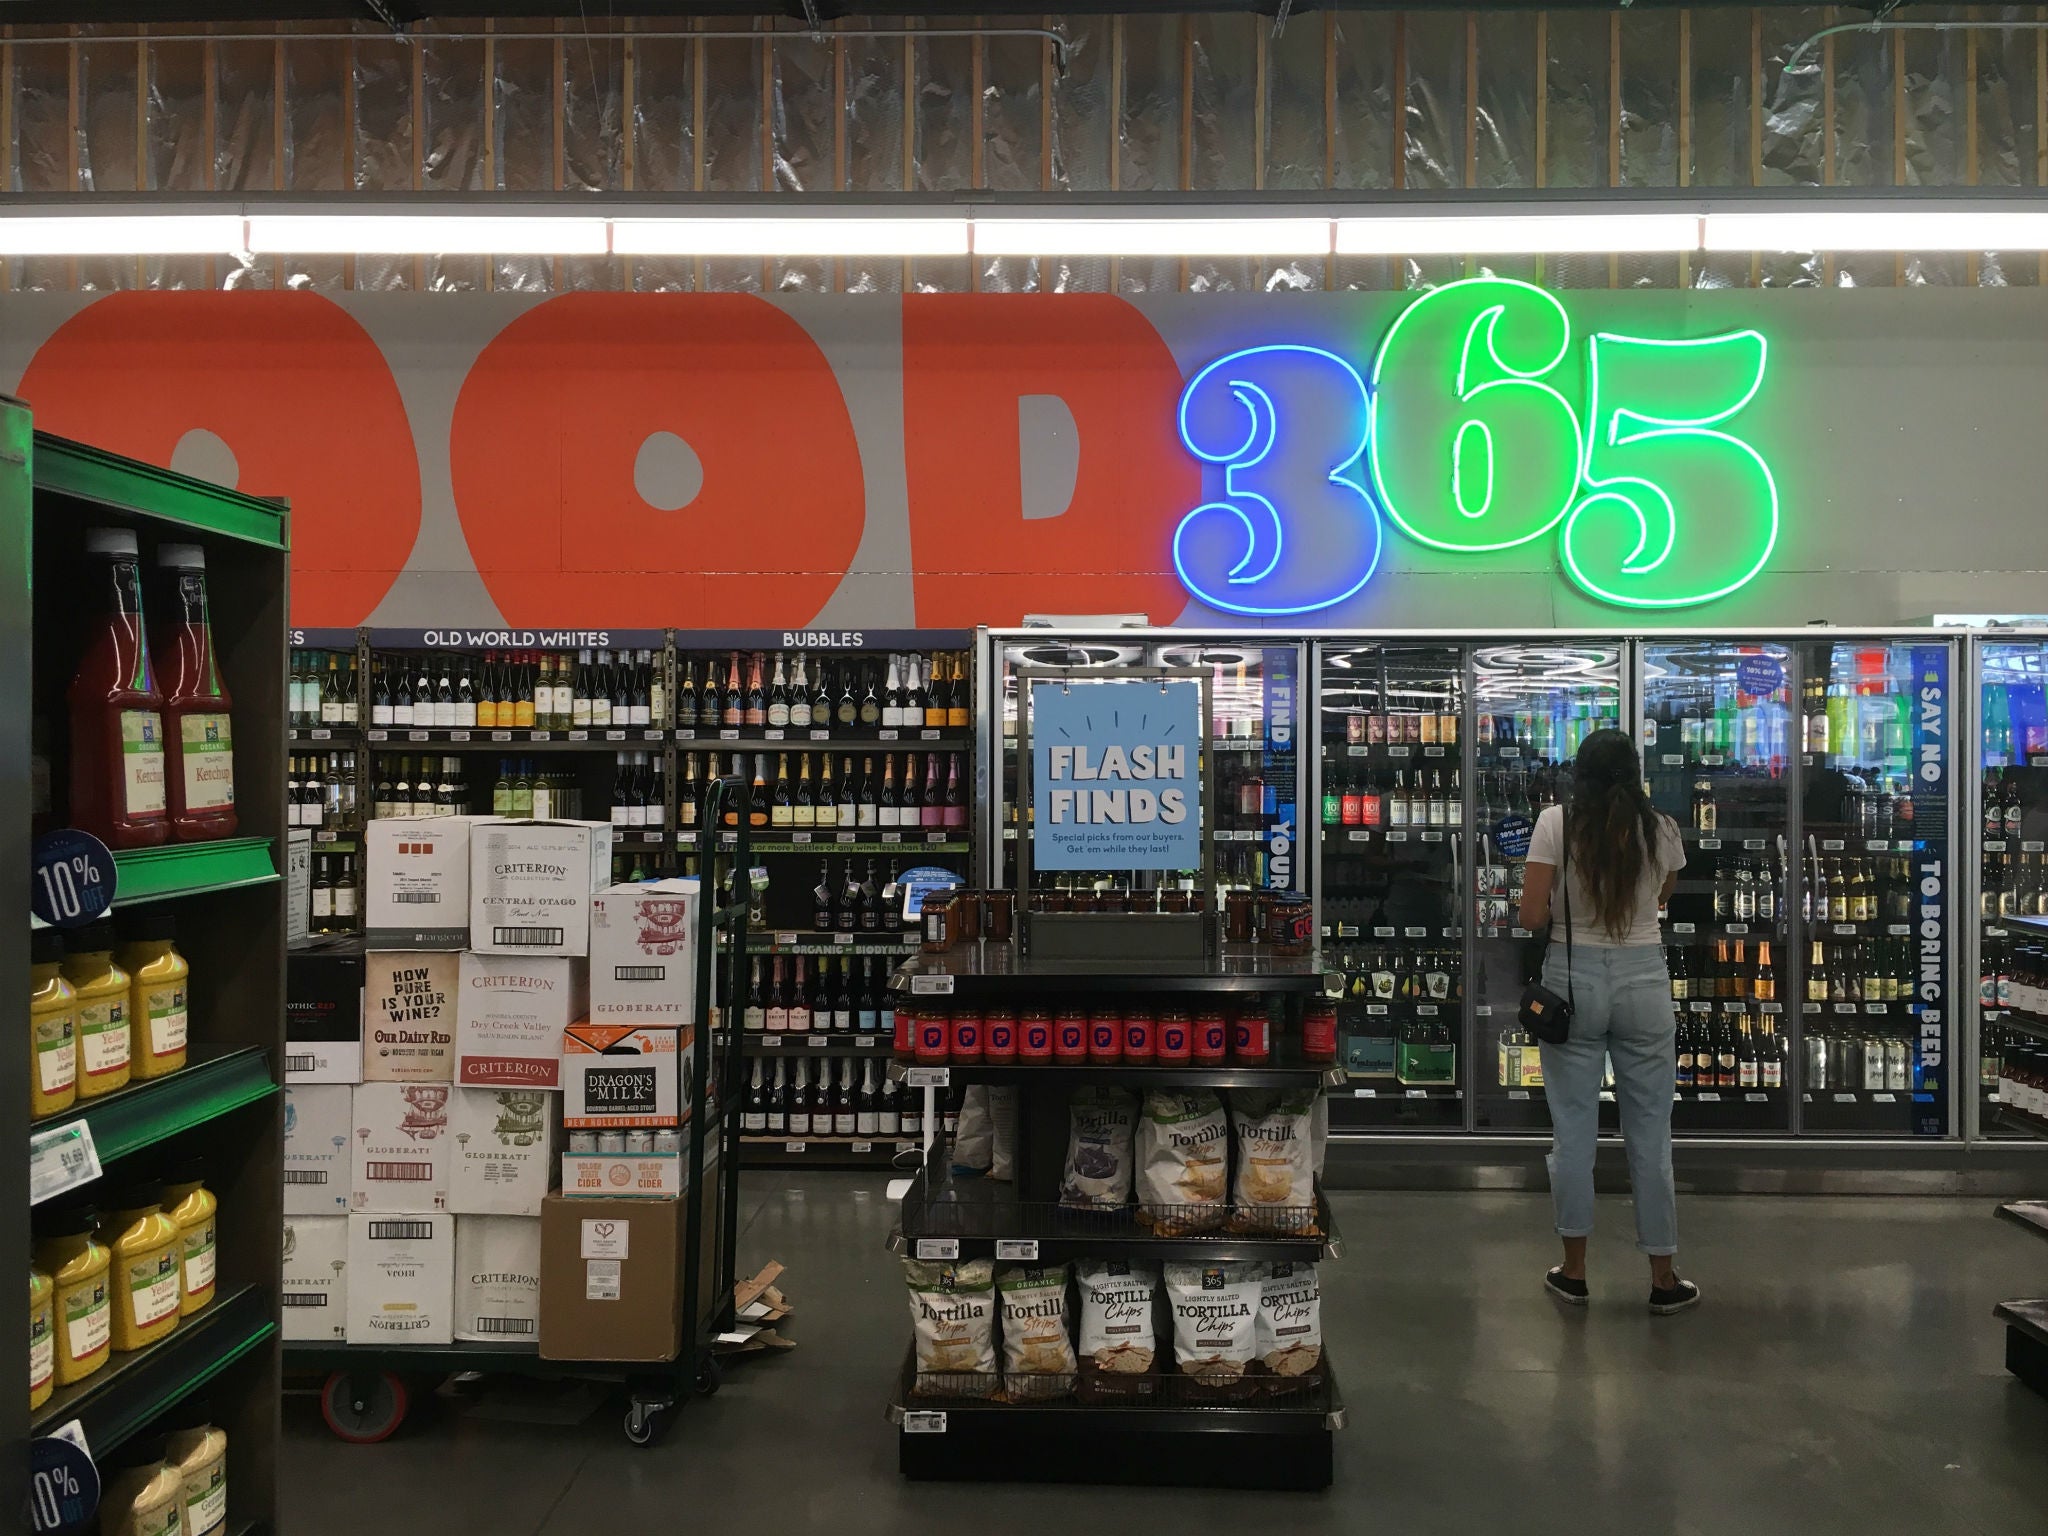 The new low-cost supermarket chain, 365 by Whole Foods Market, is aimed at budget-conscious, tech-savvy millennials